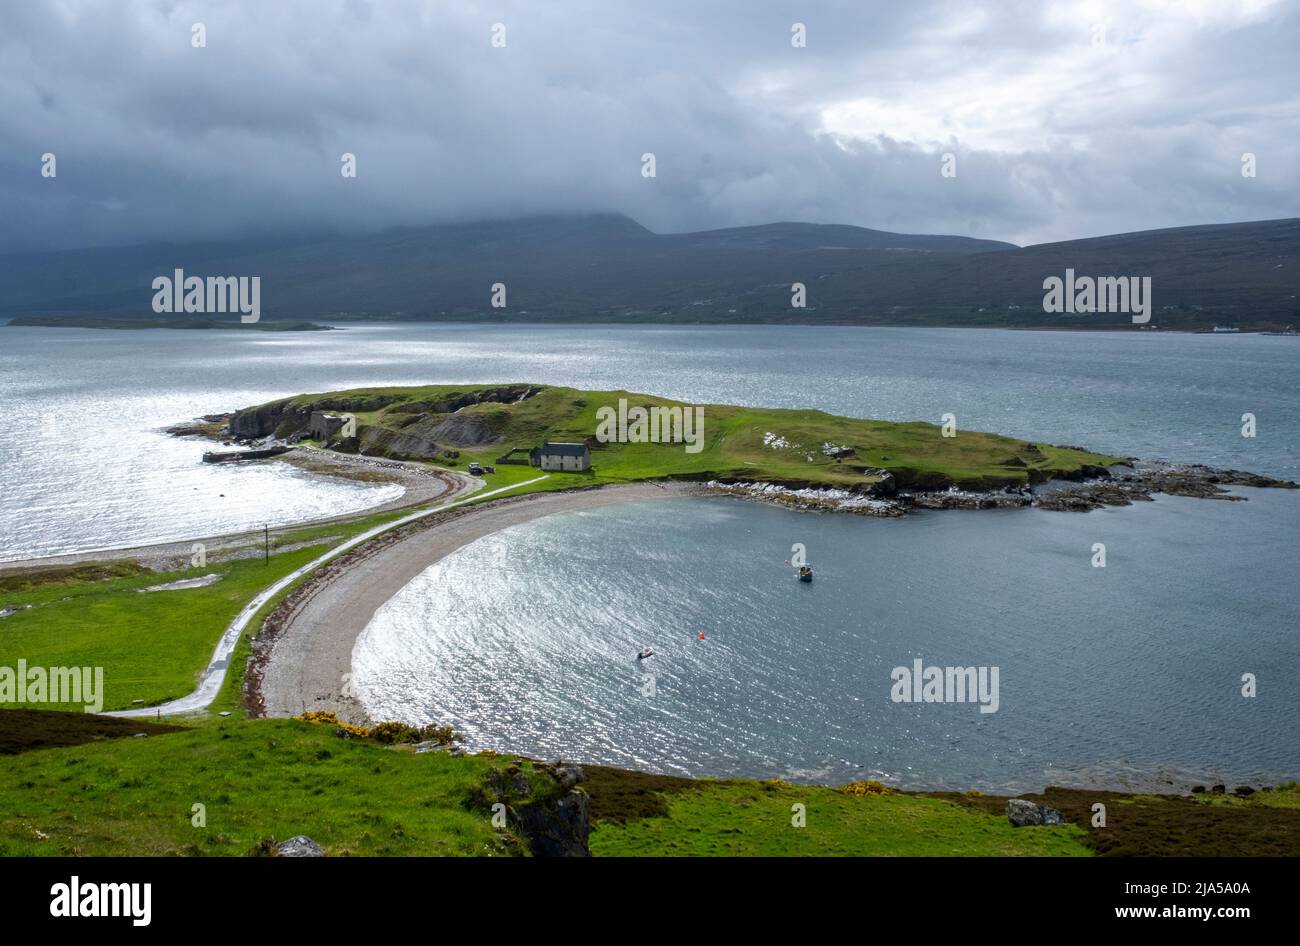 View of the old Ferry House, Harbour and Lime Kilns, Ard Neackie Peninsula on Loch Eriboll, Sutherland, Scottish Highlands Stock Photo